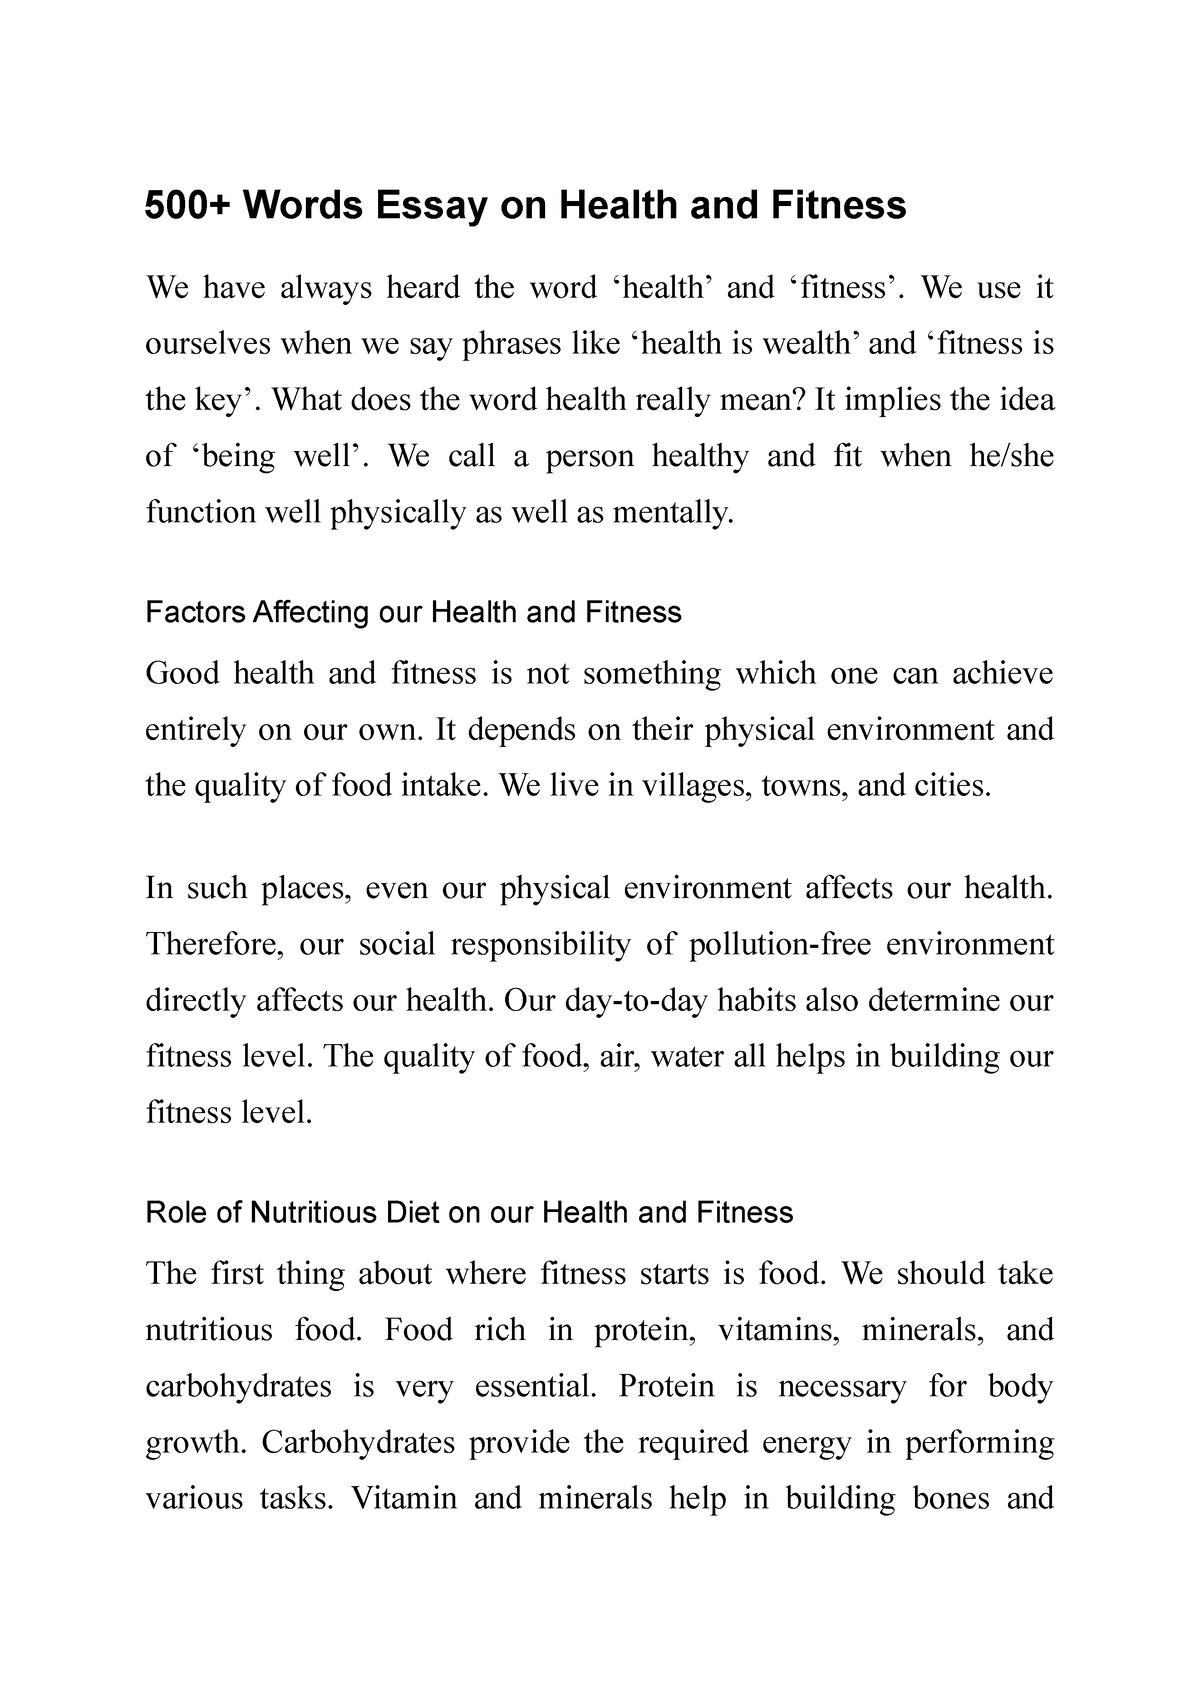 essay on topic health and fitness in 500 words